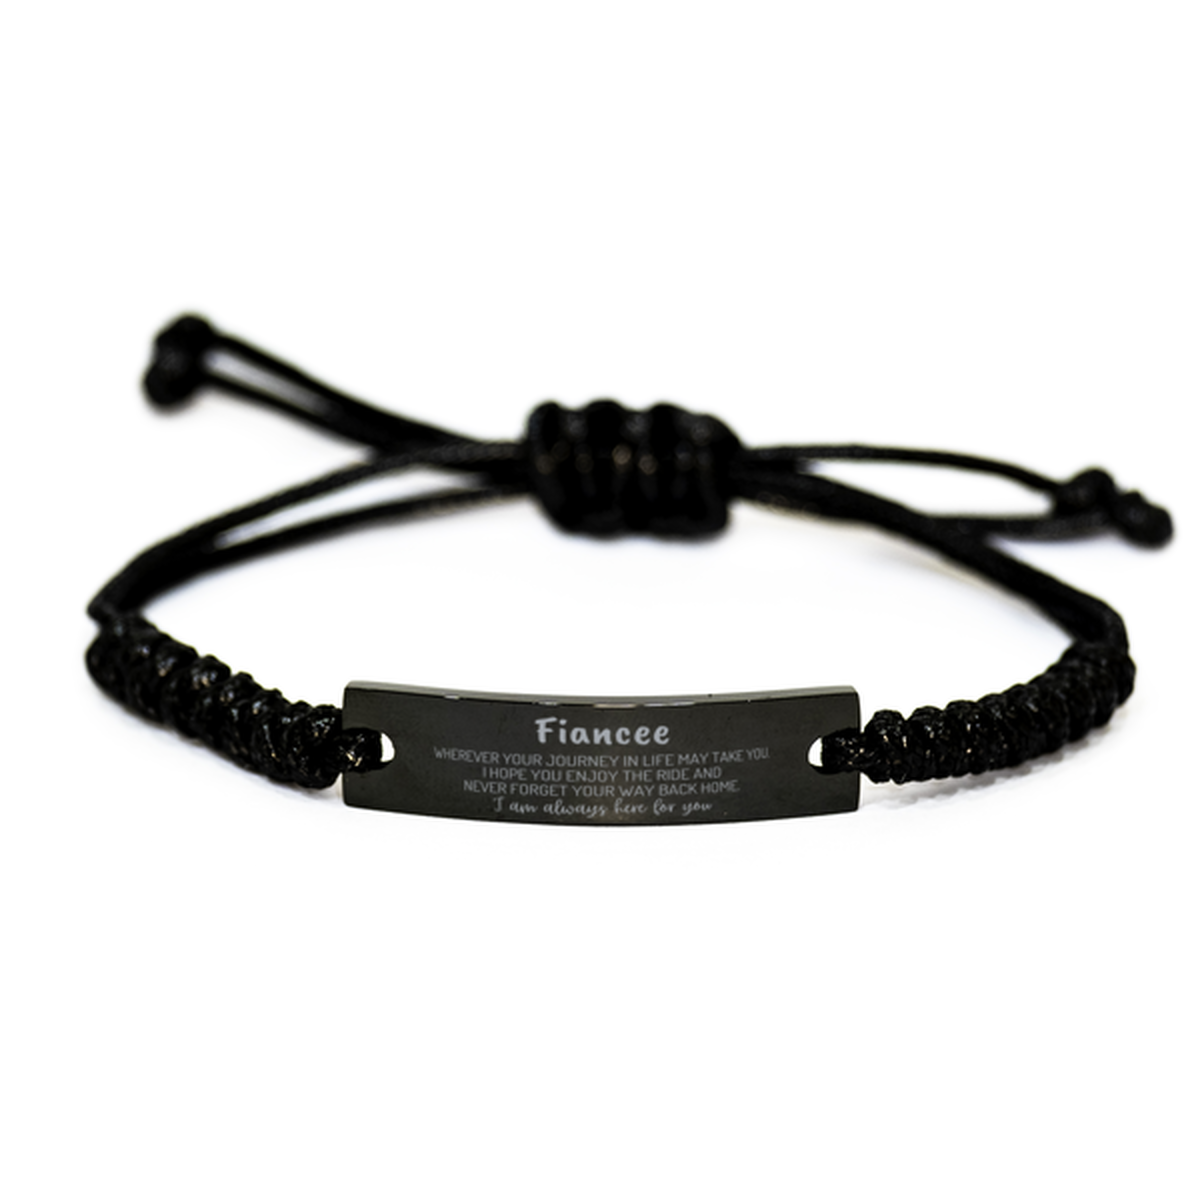 Fiancee wherever your journey in life may take you, I am always here for you Fiancee Black Rope Bracelet, Awesome Christmas Gifts For Fiancee, Fiancee Birthday Gifts for Men Women Family Loved One